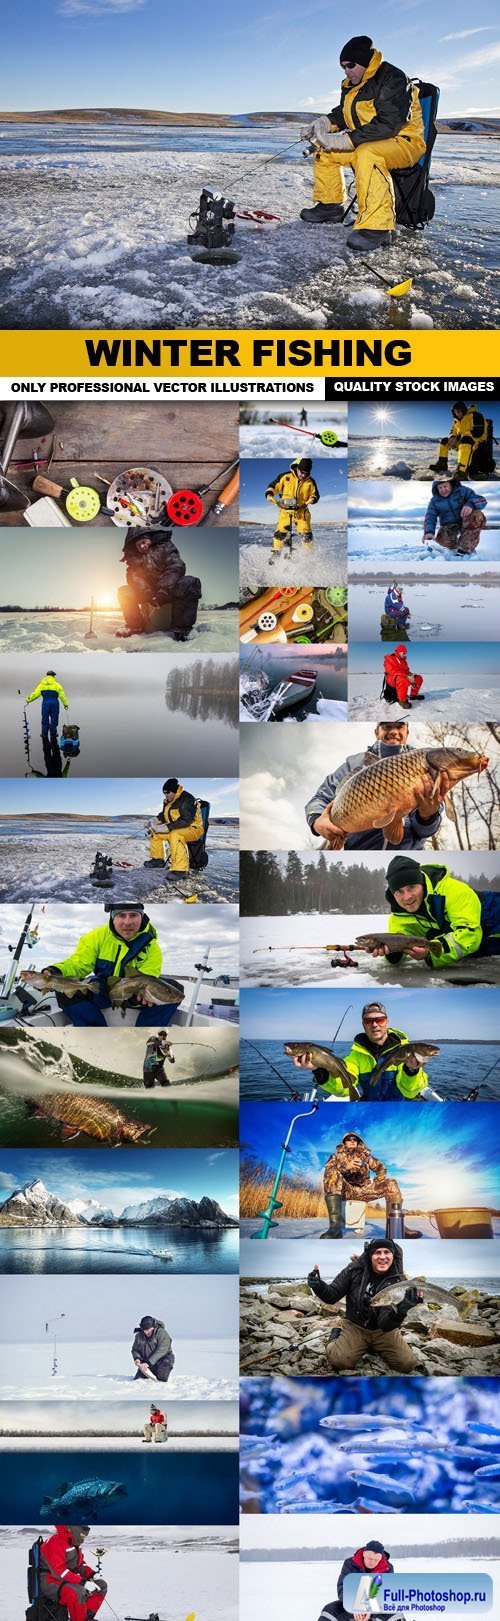 Winter Fishing - 25 HQ Images